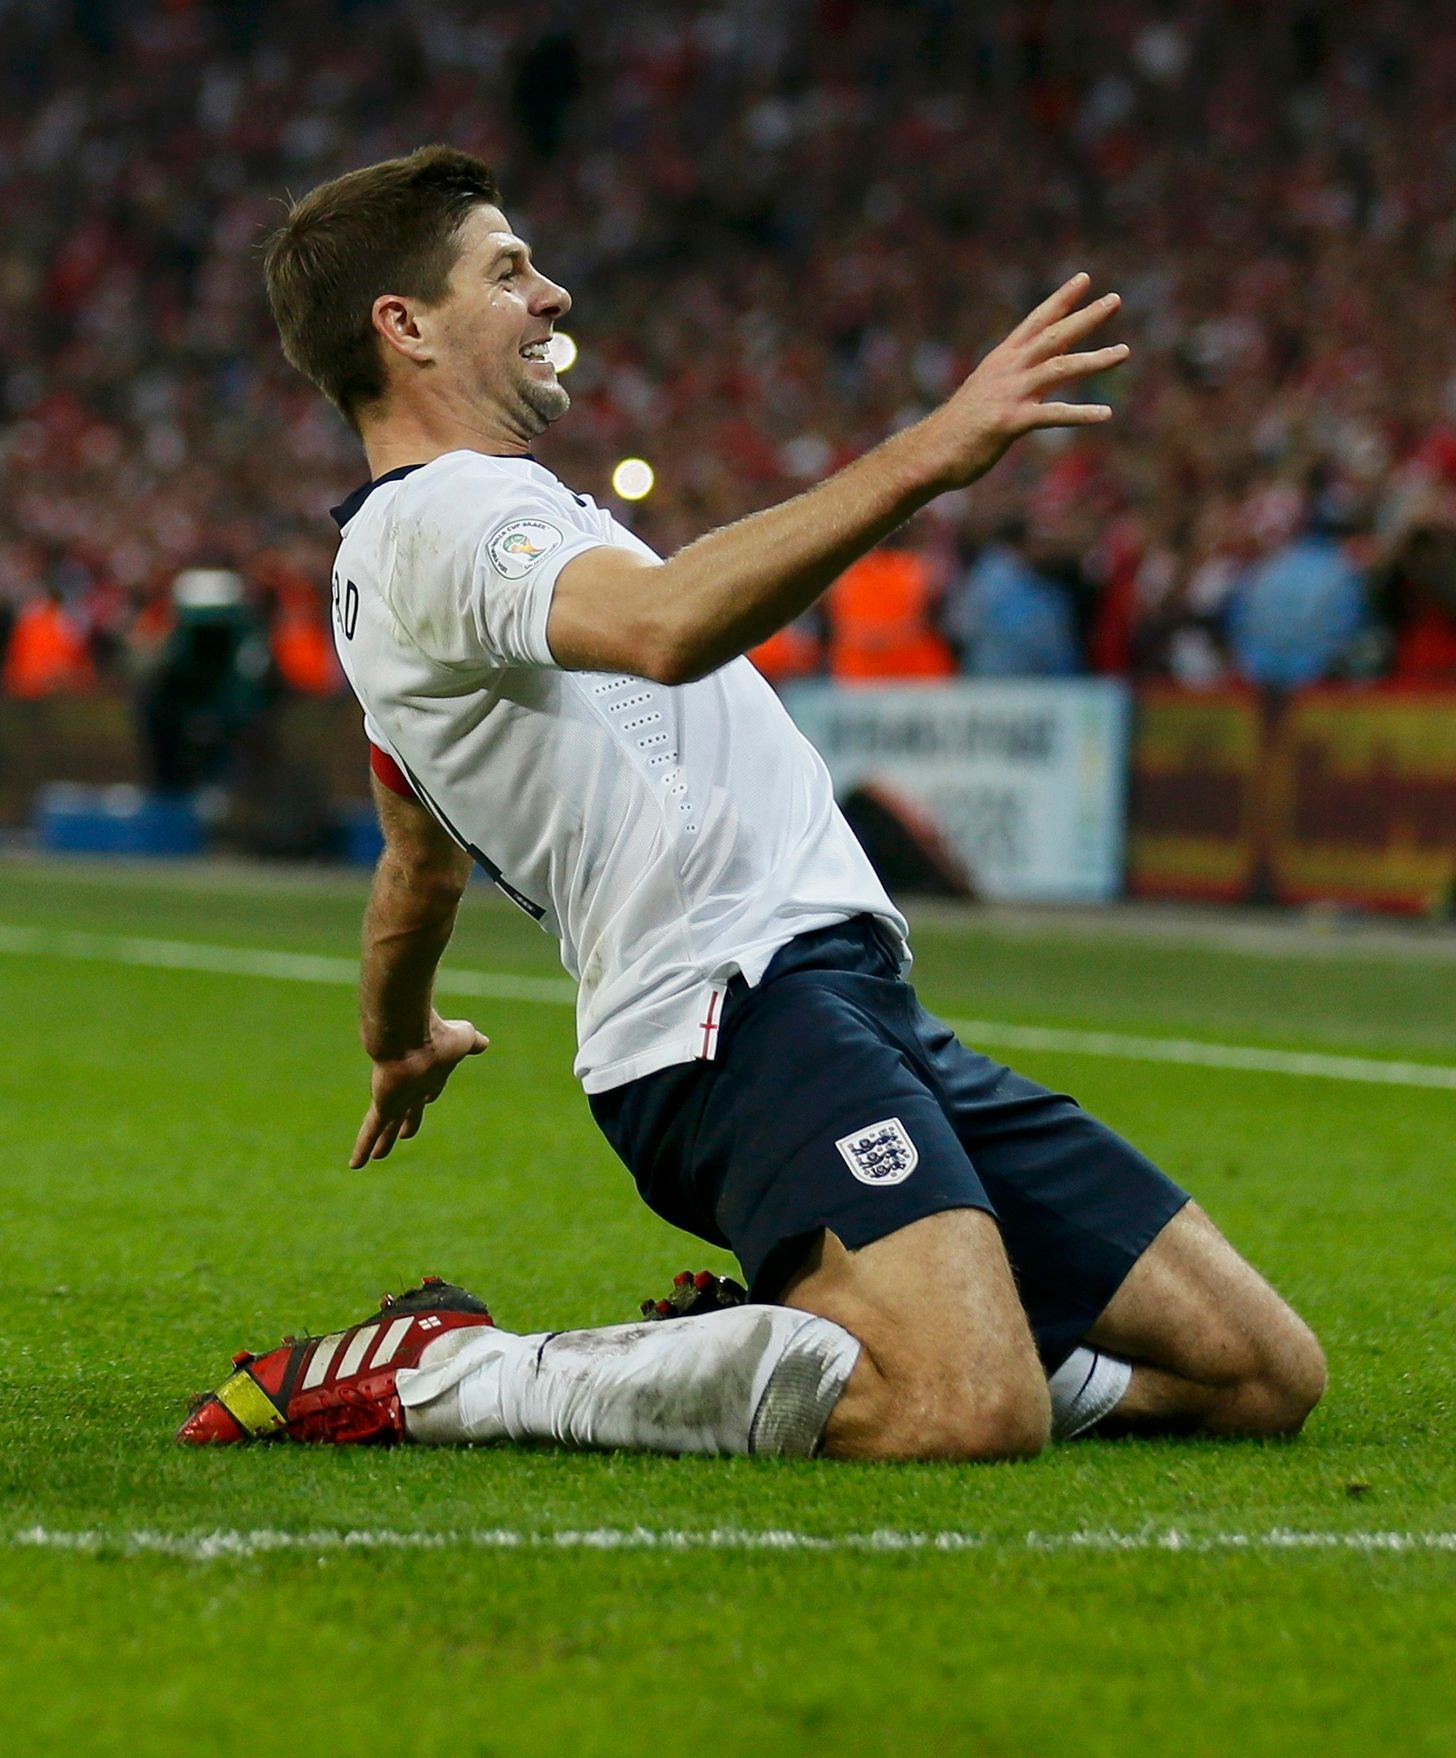 England captain Steven Gerrard celebrates his goal during their 2014 World Cup qualifying soccer match against Poland at Wembley Stadium in London